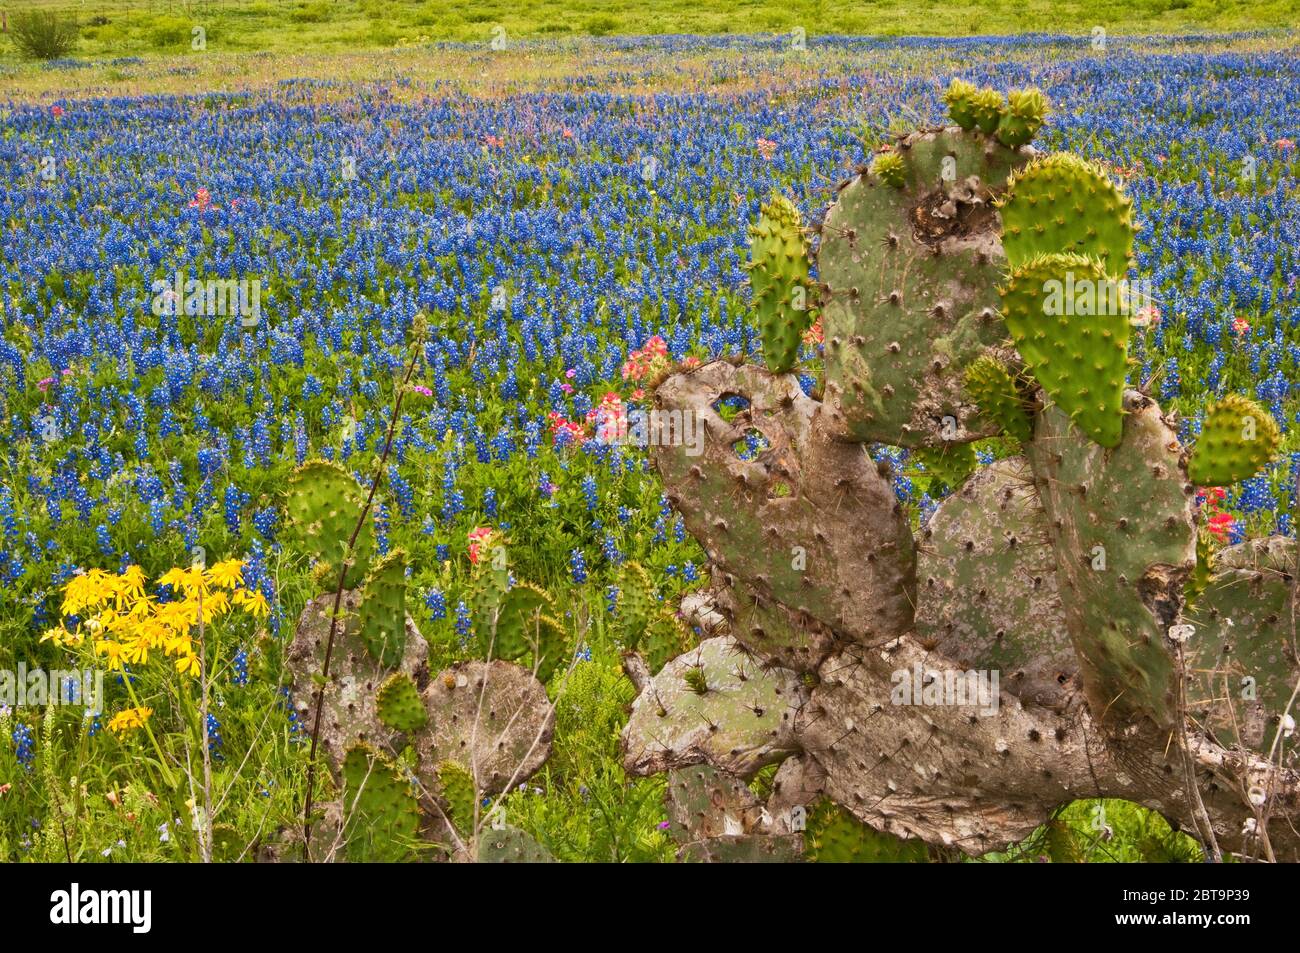 Prickly pear cactus and sunflowers in front of field of bluebonnets and some Indian paintbrush wildflowers at roadside in springtime,  near Helena, TX Stock Photo